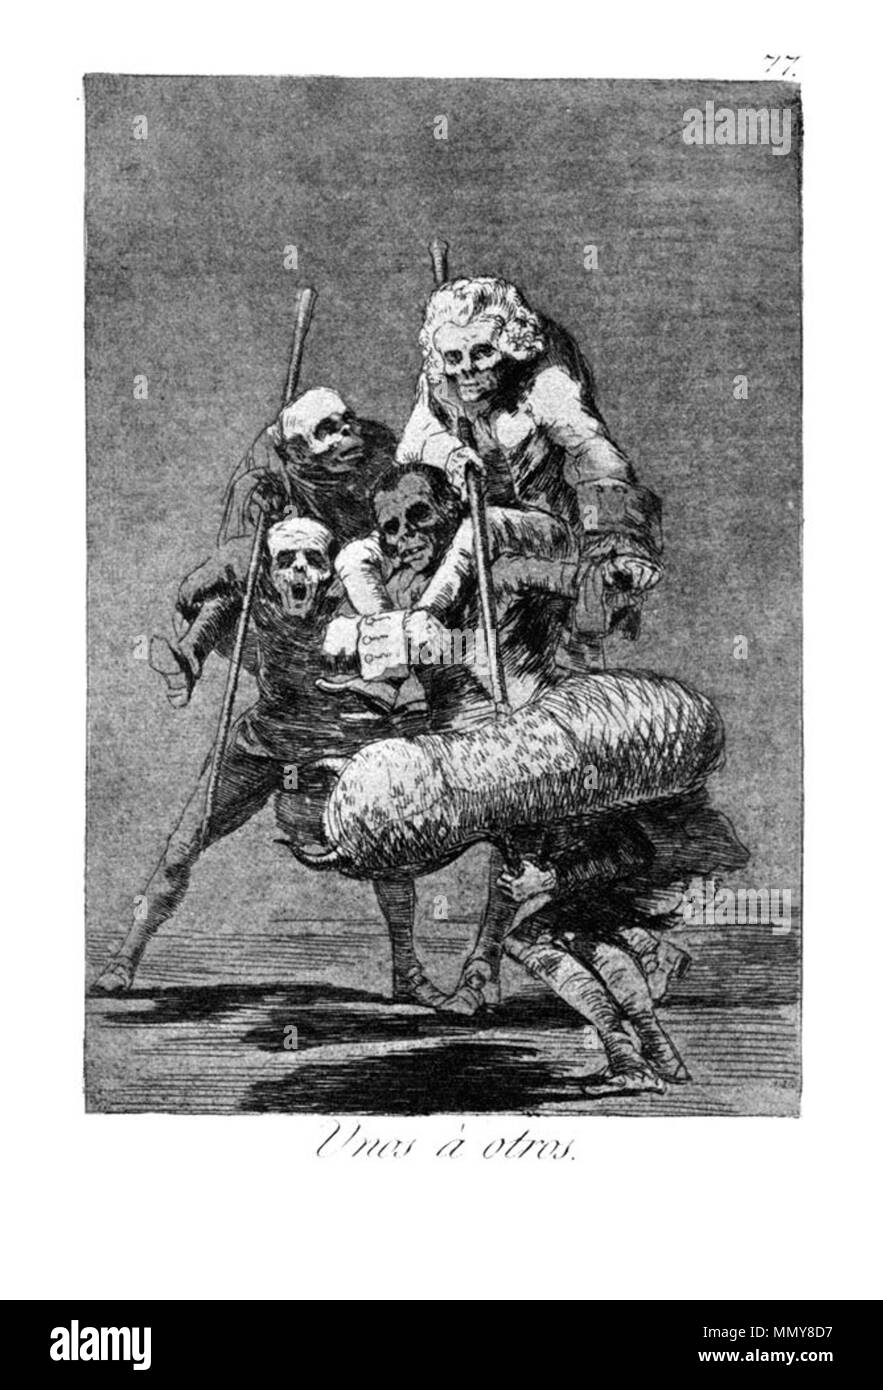 . Los Caprichos is a set of 80 aquatint prints created by Francisco Goya for release in 1799.  . 1799.   Francisco Goya  (1746–1828)      Alternative names Francisco Goya Lucientes, Francisco de Goya y Lucientes, Francisco José Goya Lucientes  Description Spanish painter, printmaker, lithographer, engraver and etcher  Date of birth/death 30 March 1746 16 April 1828  Location of birth/death Fuendetodos Bordeaux  Work location Madrid, Zaragoza, Bordeaux  Authority control  : Q5432 VIAF:?54343141 ISNI:?0000 0001 2280 1608 ULAN:?500118936 LCCN:?n79003363 NLA:?36545788 WorldCat Goya - Caprichos (77 Stock Photo